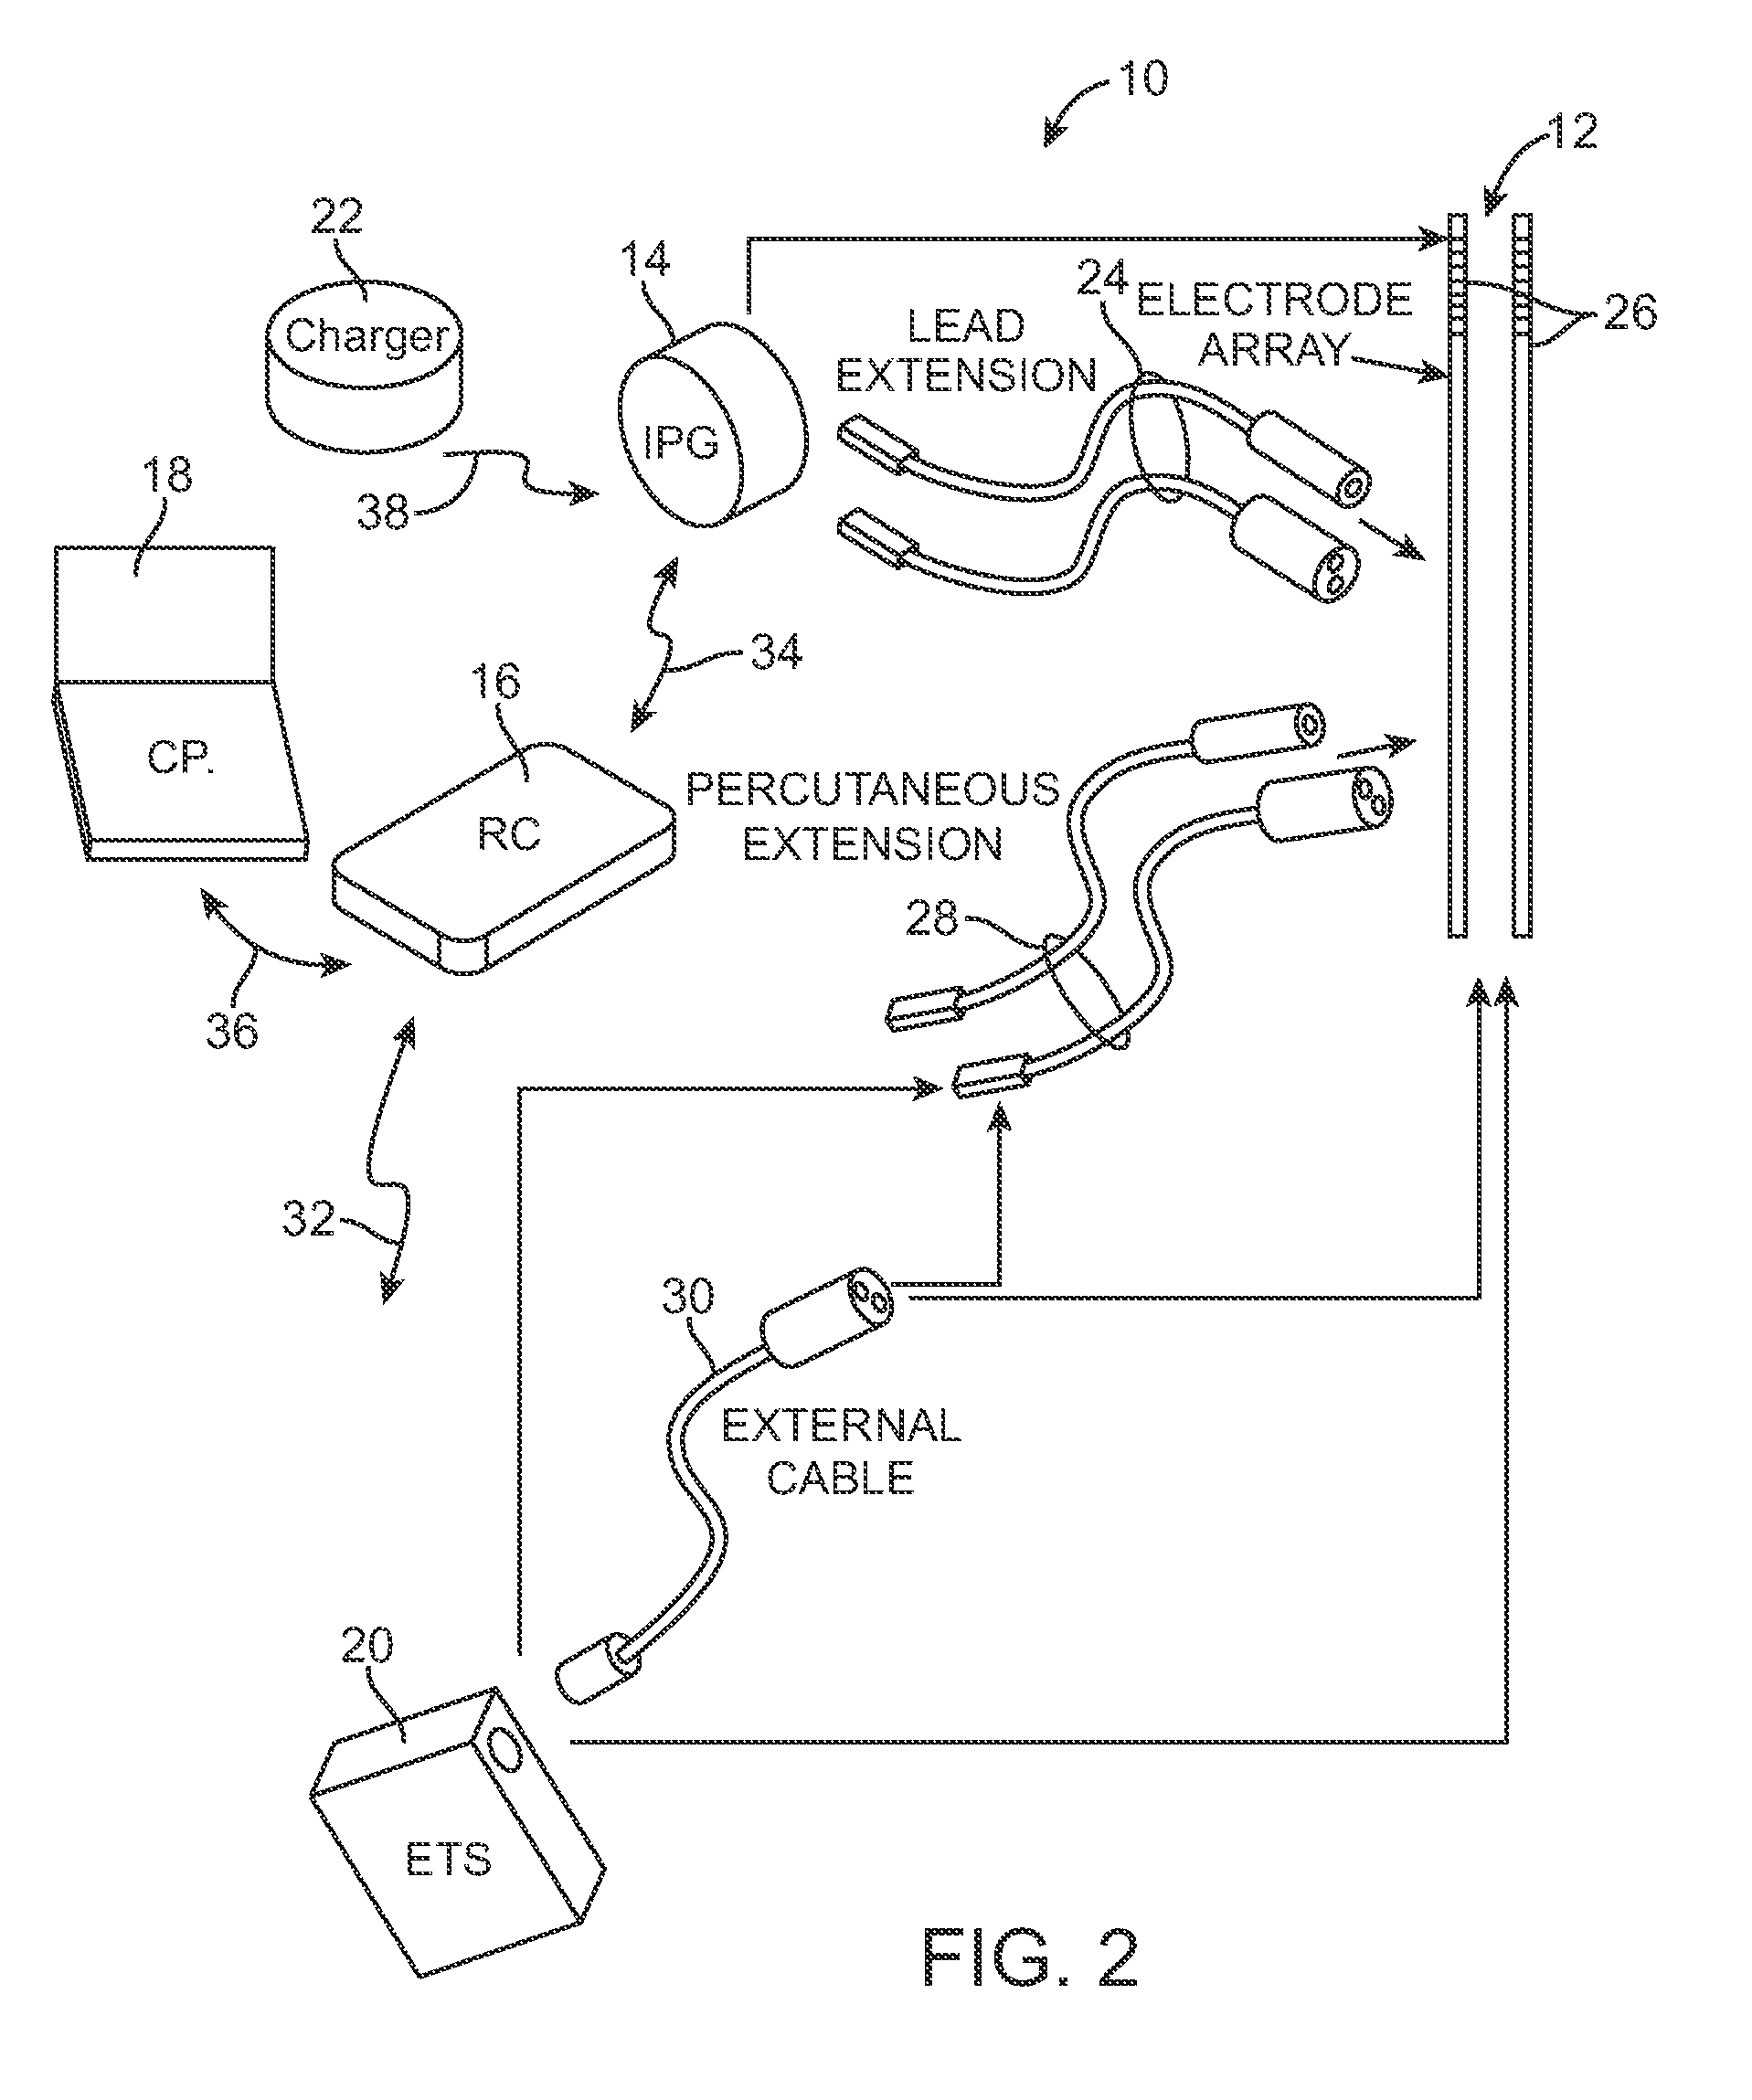 Methods to avoid frequency locking in a multi-channel neurostimulation system using pulse placement